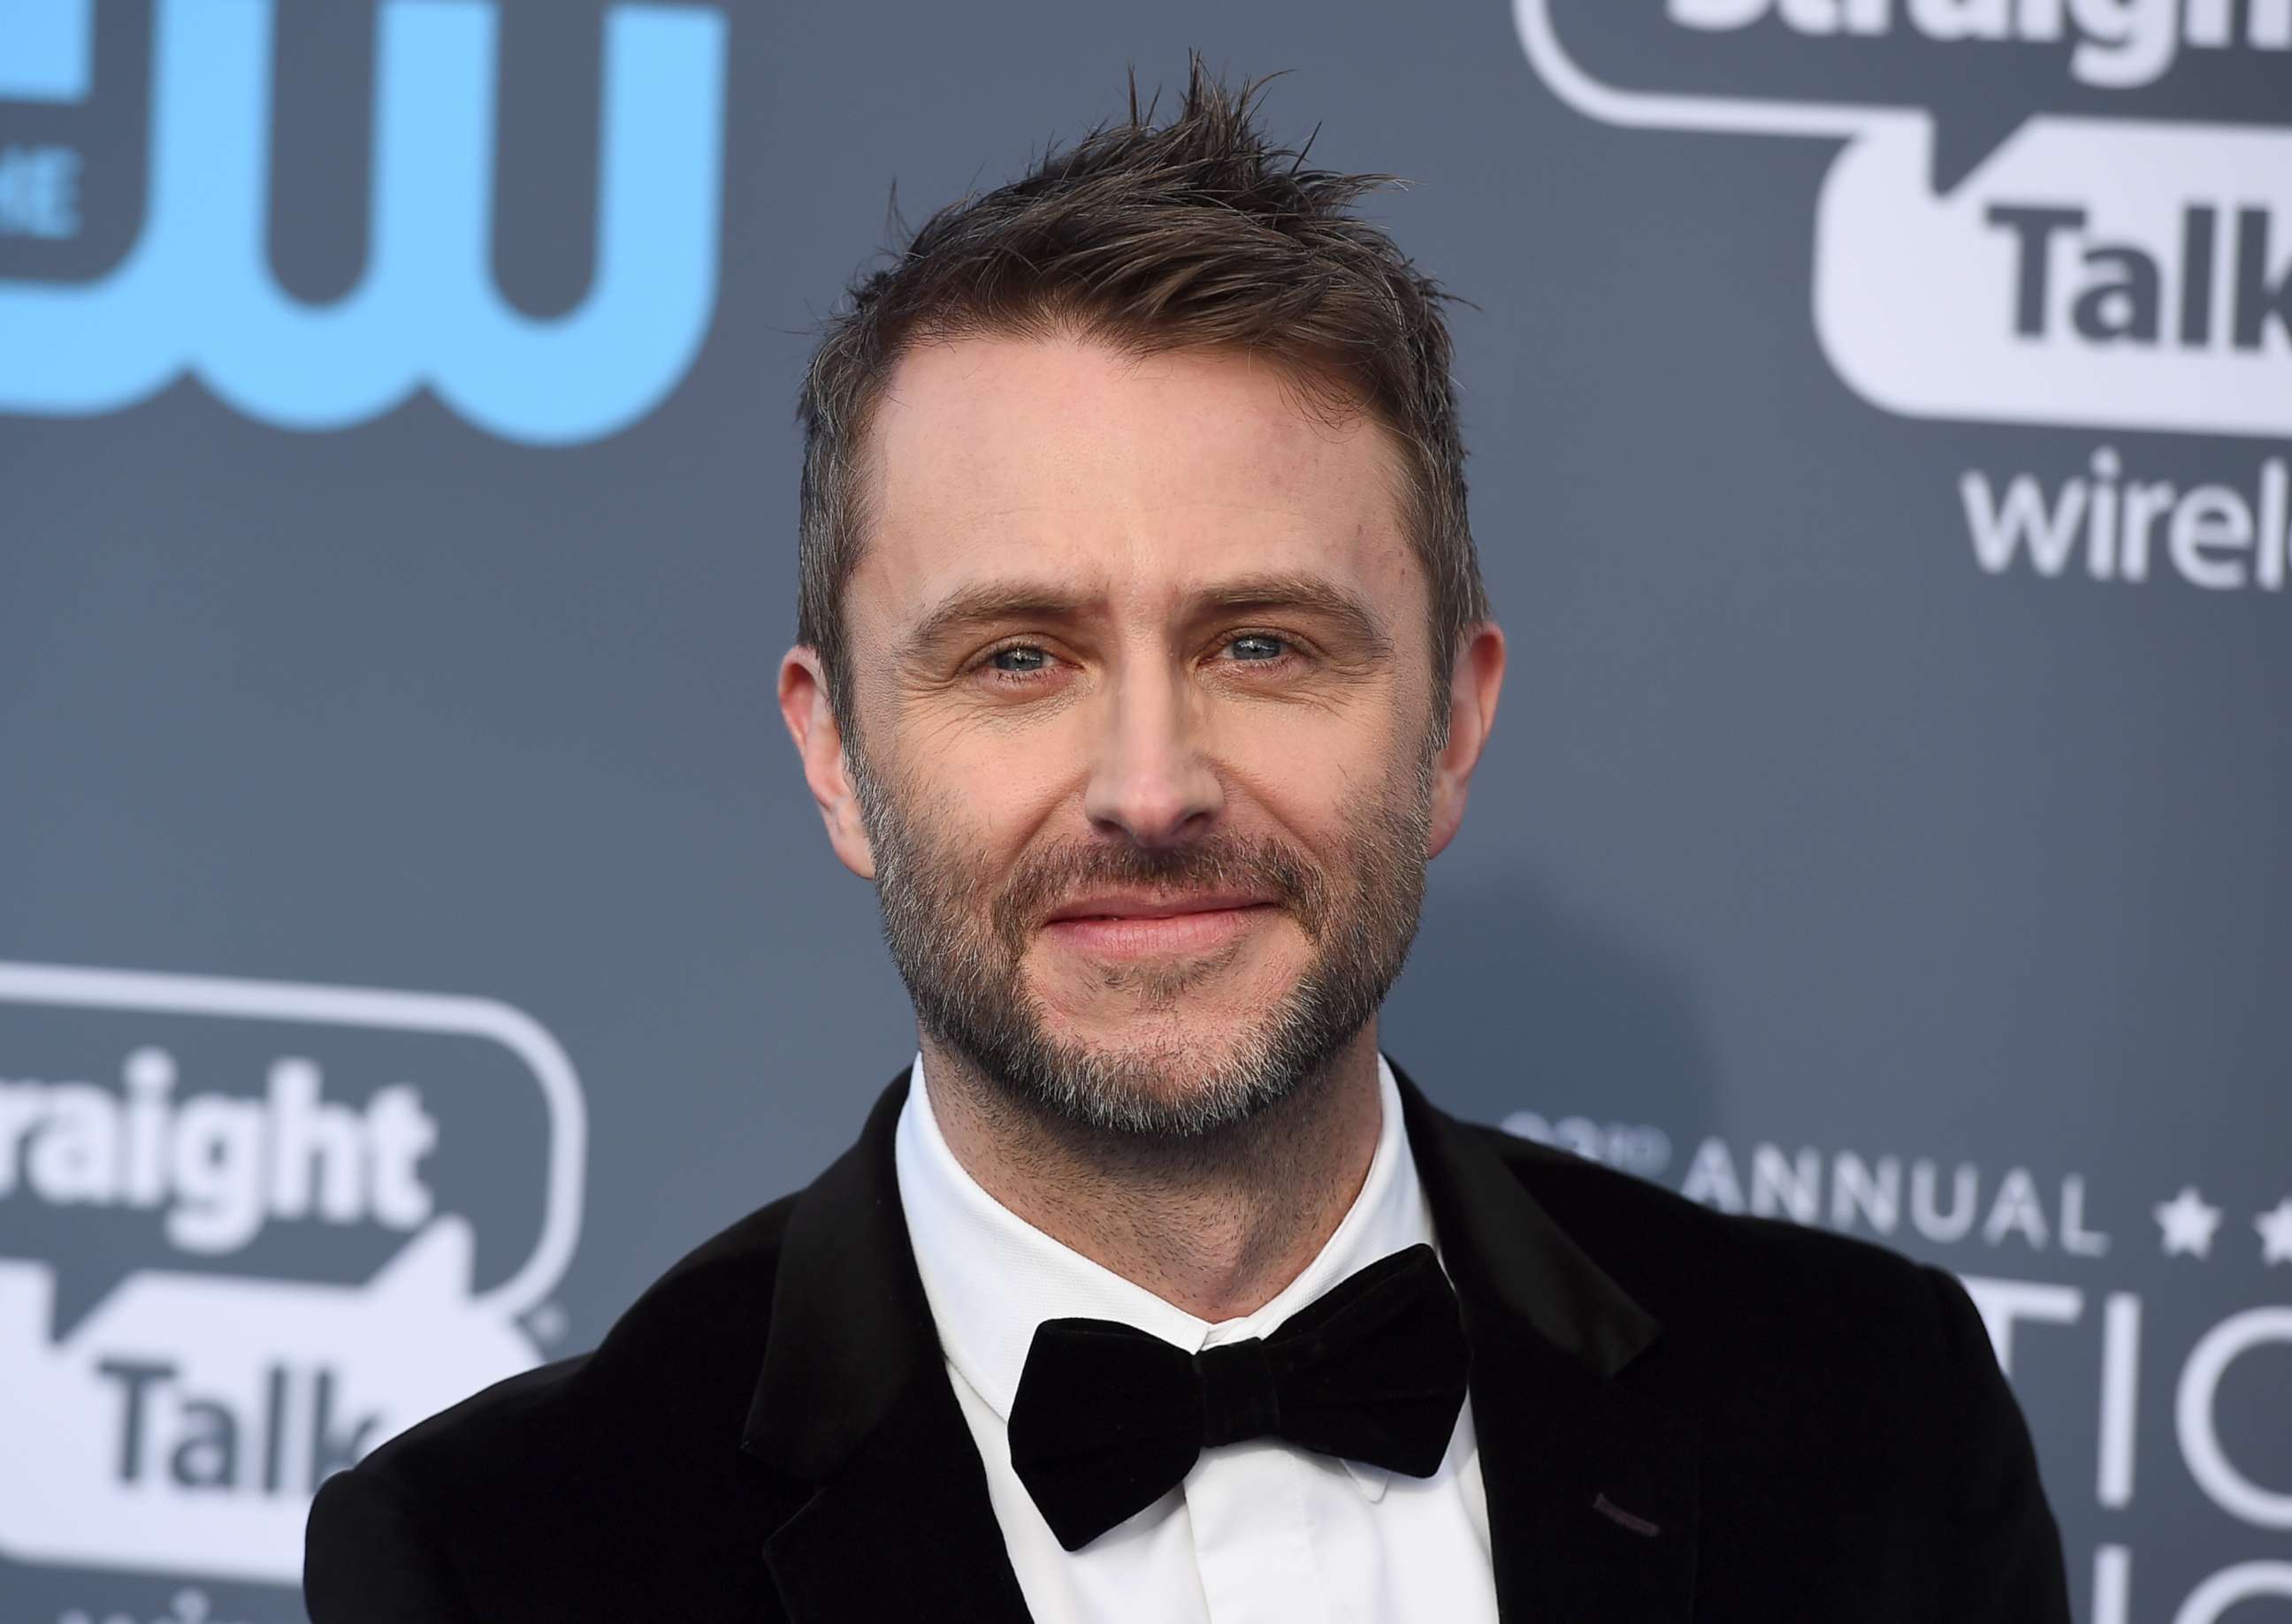 PHOTO: In this Jan. 11, 2018 file photo, Chris Hardwick arrives at the 23rd annual Critics' Choice Awards in Santa Monica, Calif.